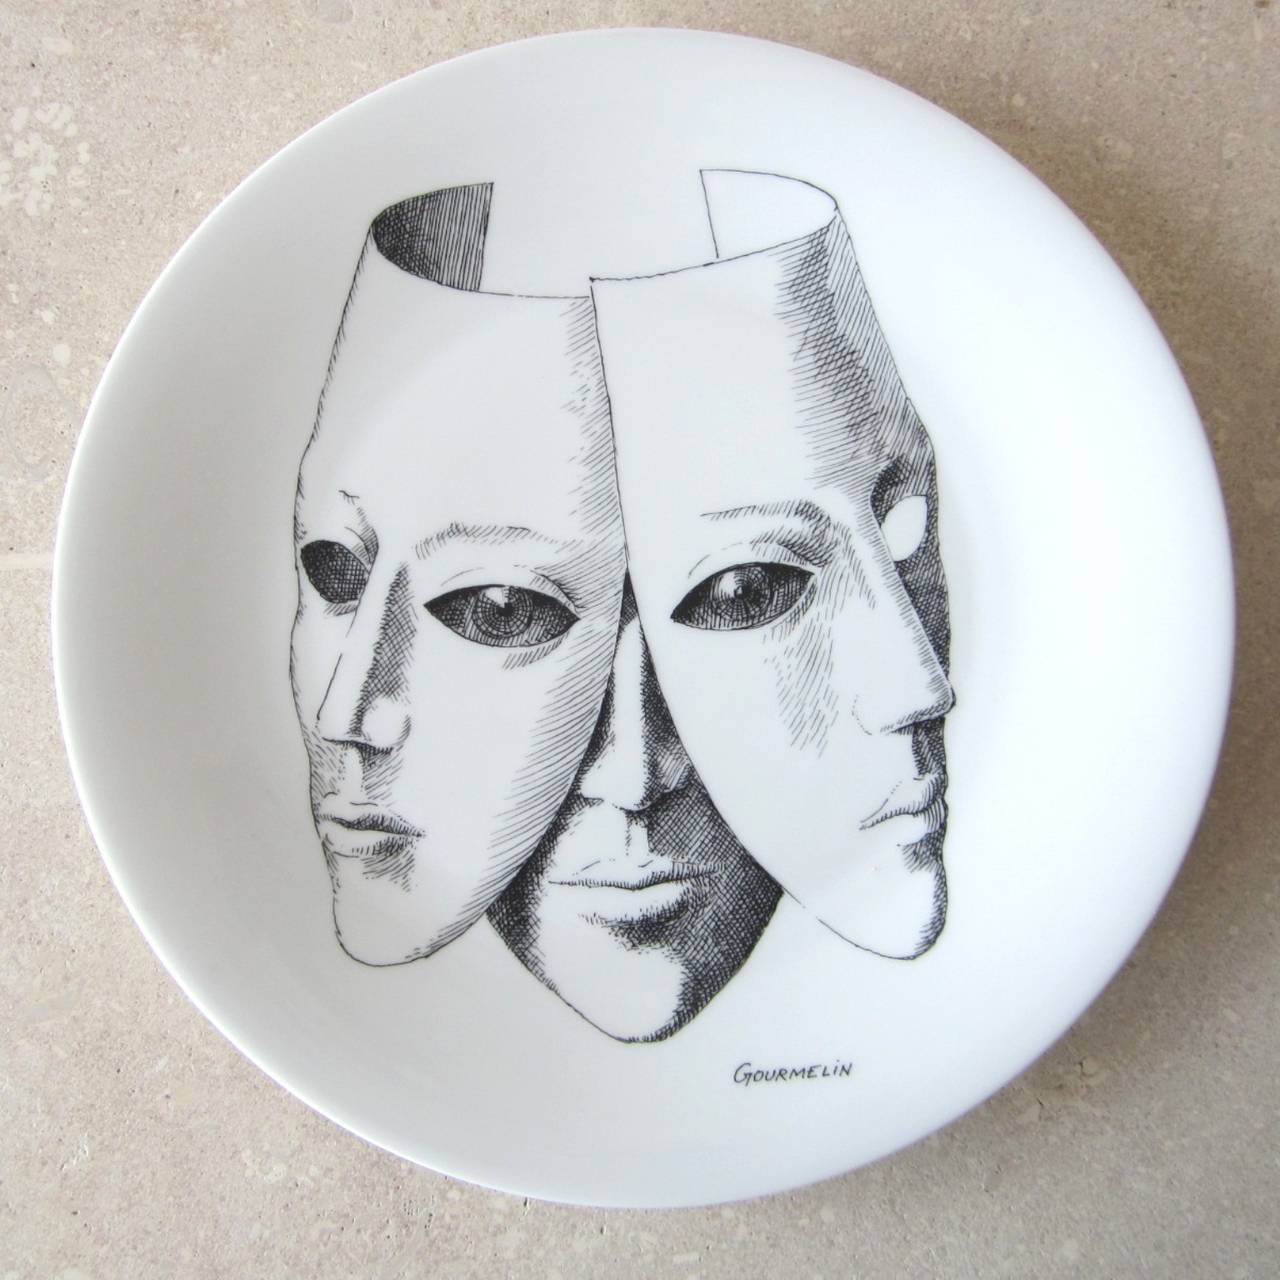 Mid century Artist limited edition of 50 pieces signed by Gourmelin.
Each plate is numbered. The quality of the Porcelain is perfect, signed and painted by the artist on the front part below the drawing is the signature  as well on the back beside